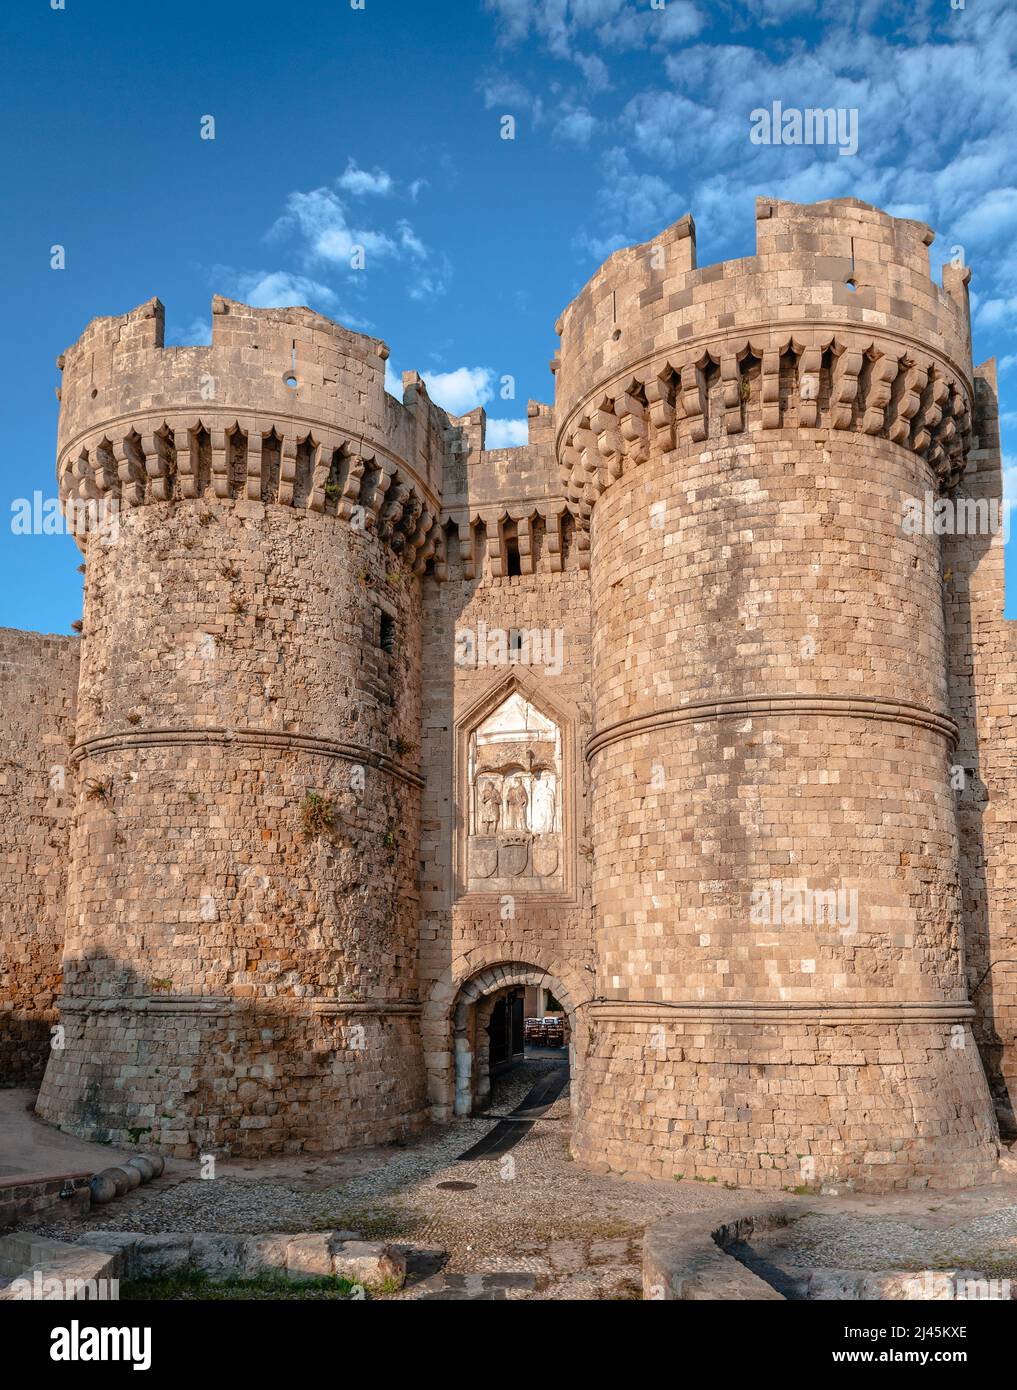 The Marine aka the Sea Gate with its defensive towers in Rhodes, Greece. It is the main entrance to the medieval town from the harbour. Stock Photo